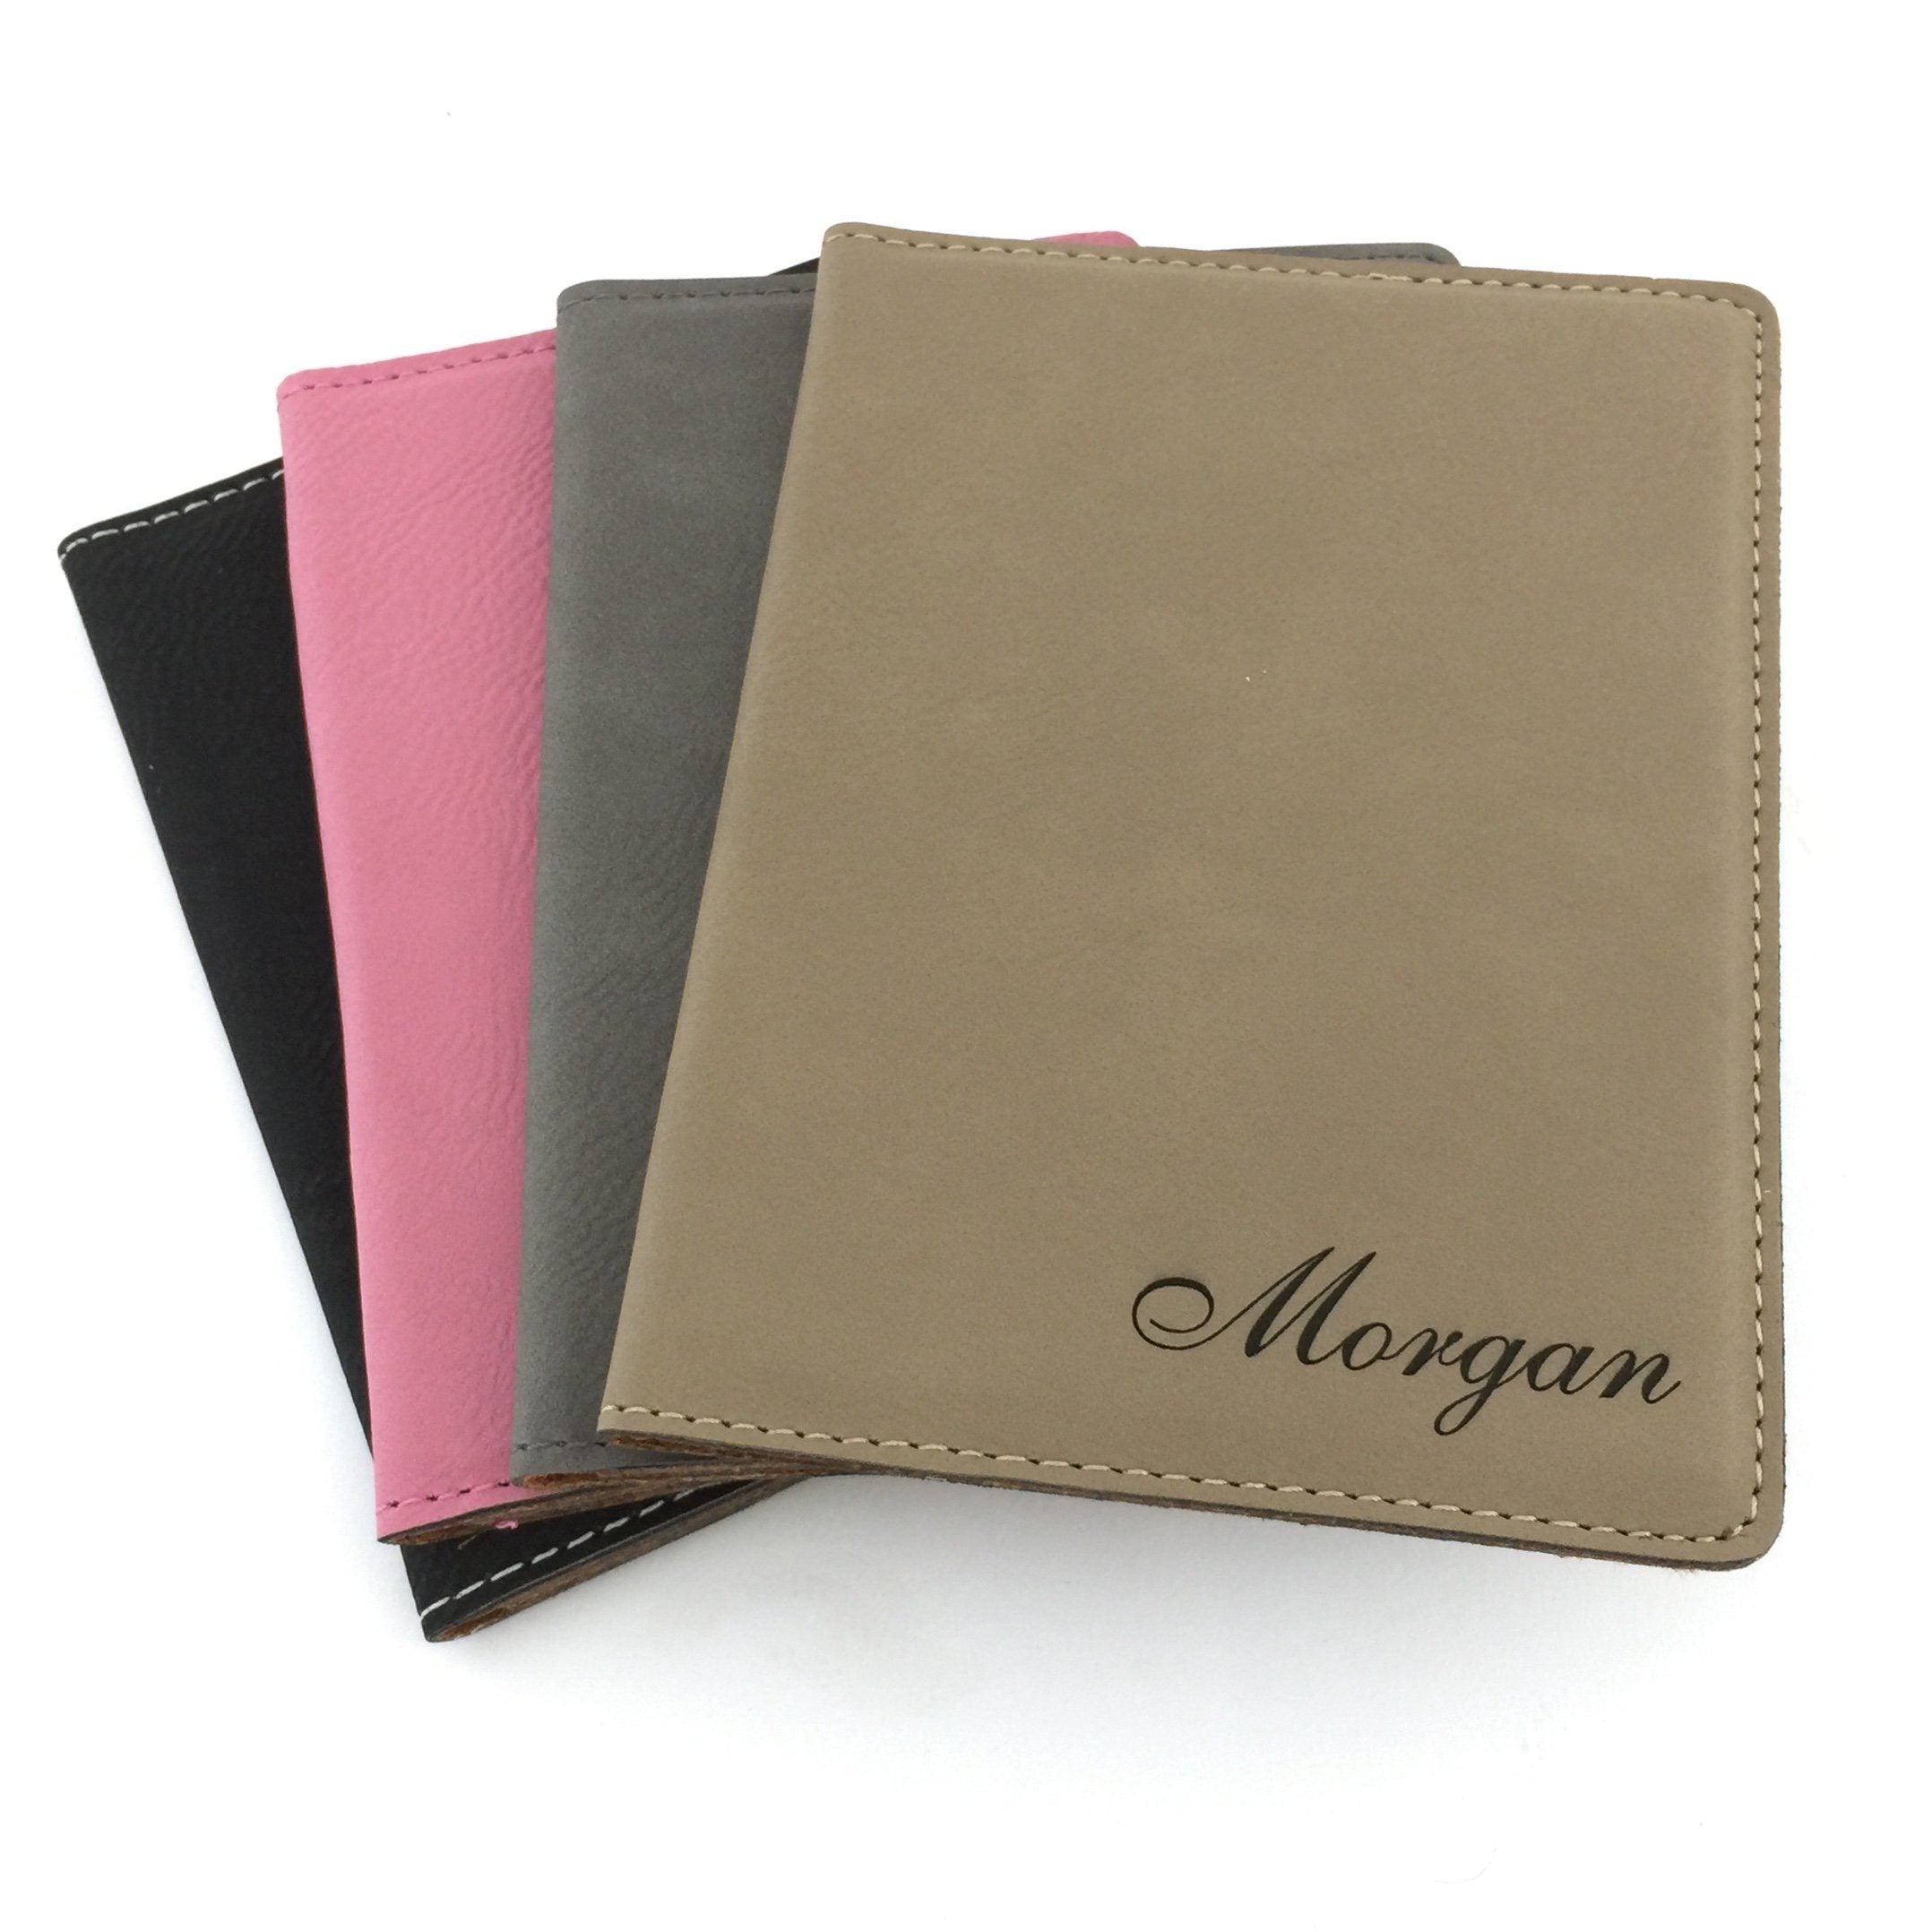 Personalized Passport Cover - The Personal Exchange